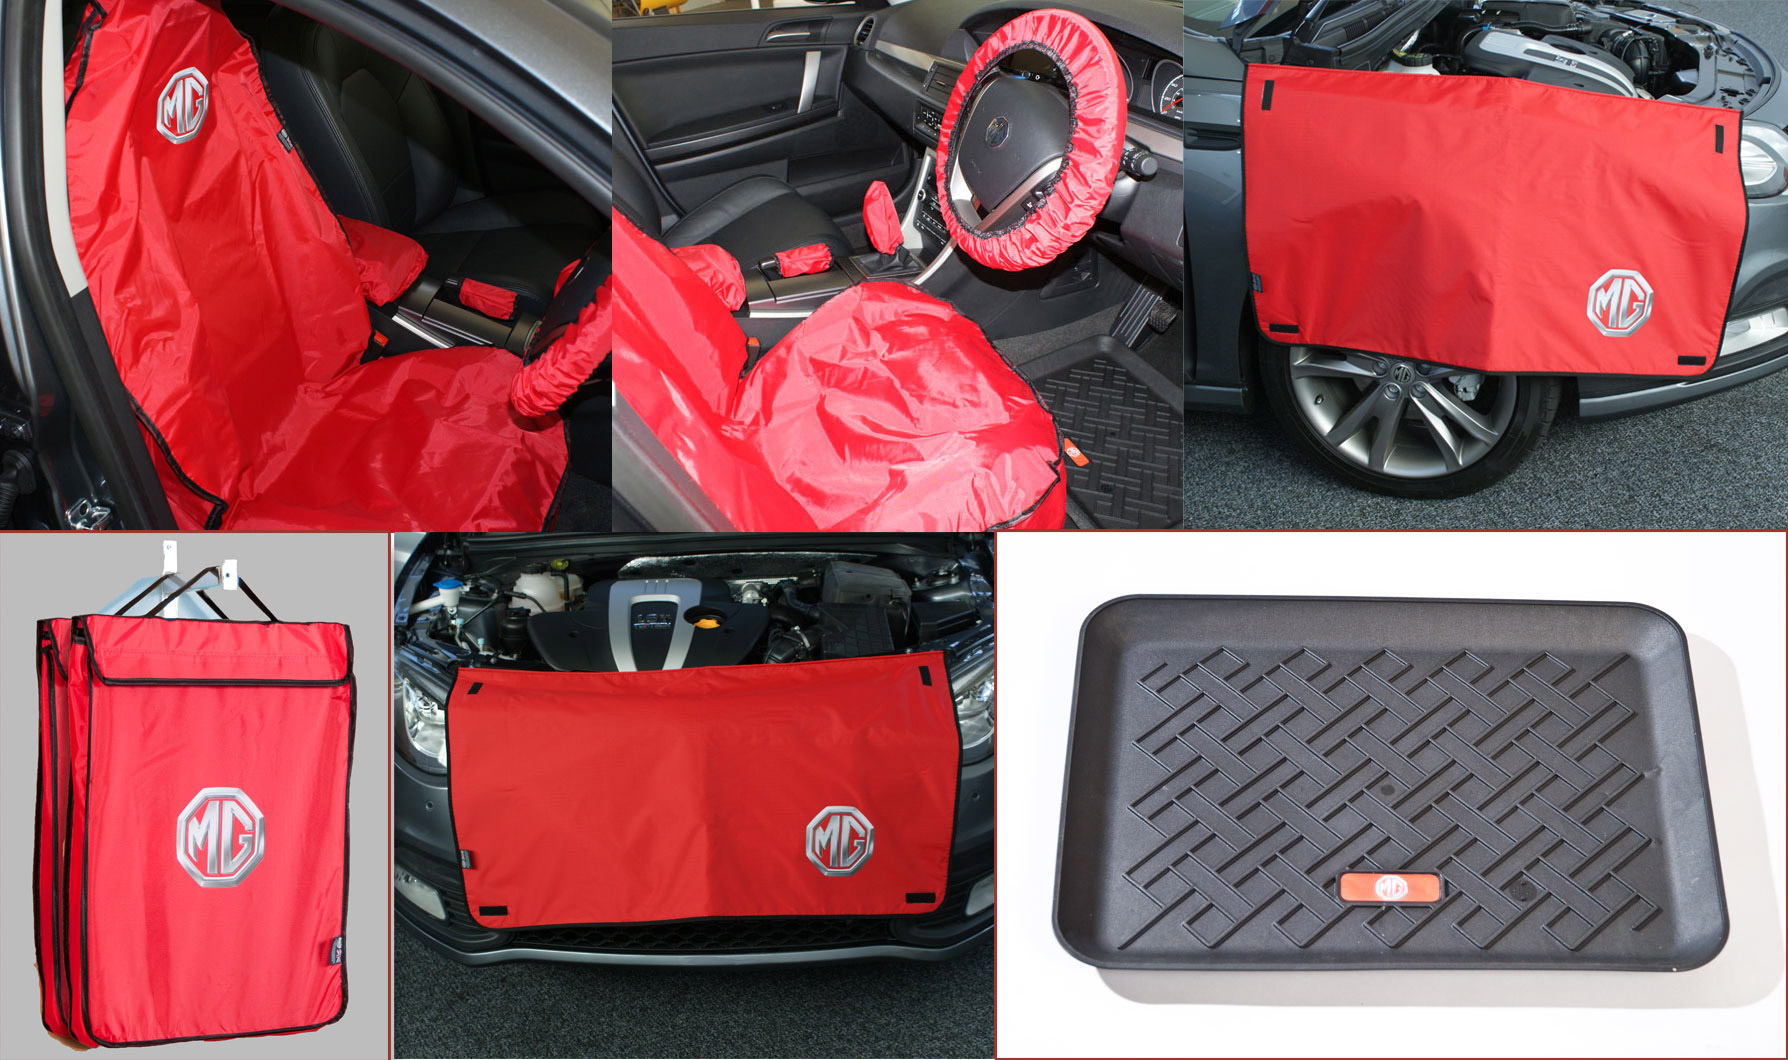 MG Reusable interior protection technicians kit from Autoproducts